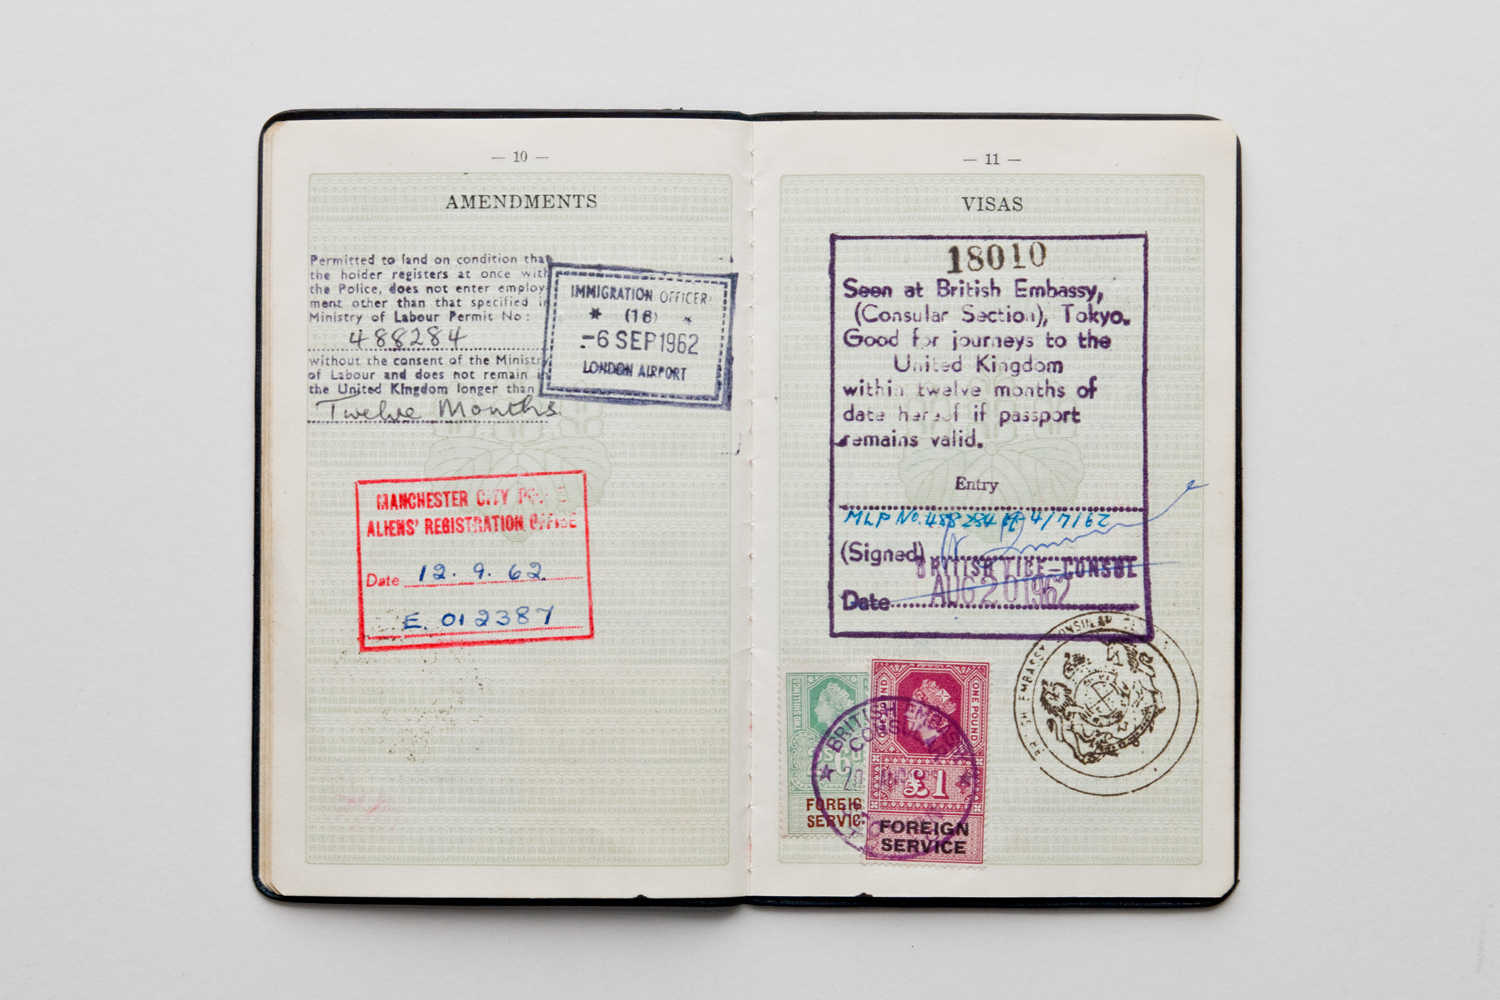  Stamps in his passport show he landed in London 6th Sept 1962, with Visa from British Embassy in Tokyo.  He was required to register as an alien with Manchester Poiice. 